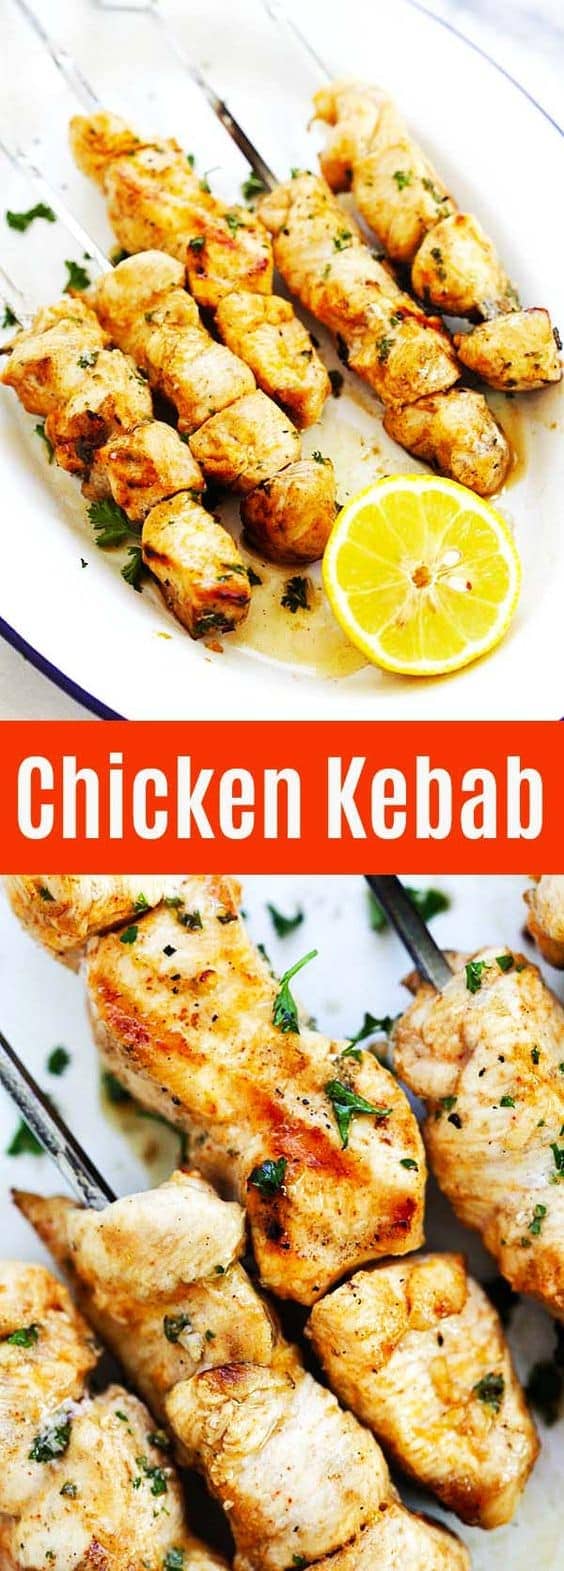 Chicken Kebab - easy recipe with the juiciest and best kebab ever! Threaded on skewers and marinated with olive oil, lemon juice, paprika, garlic and cumin | rasamalaysia.com